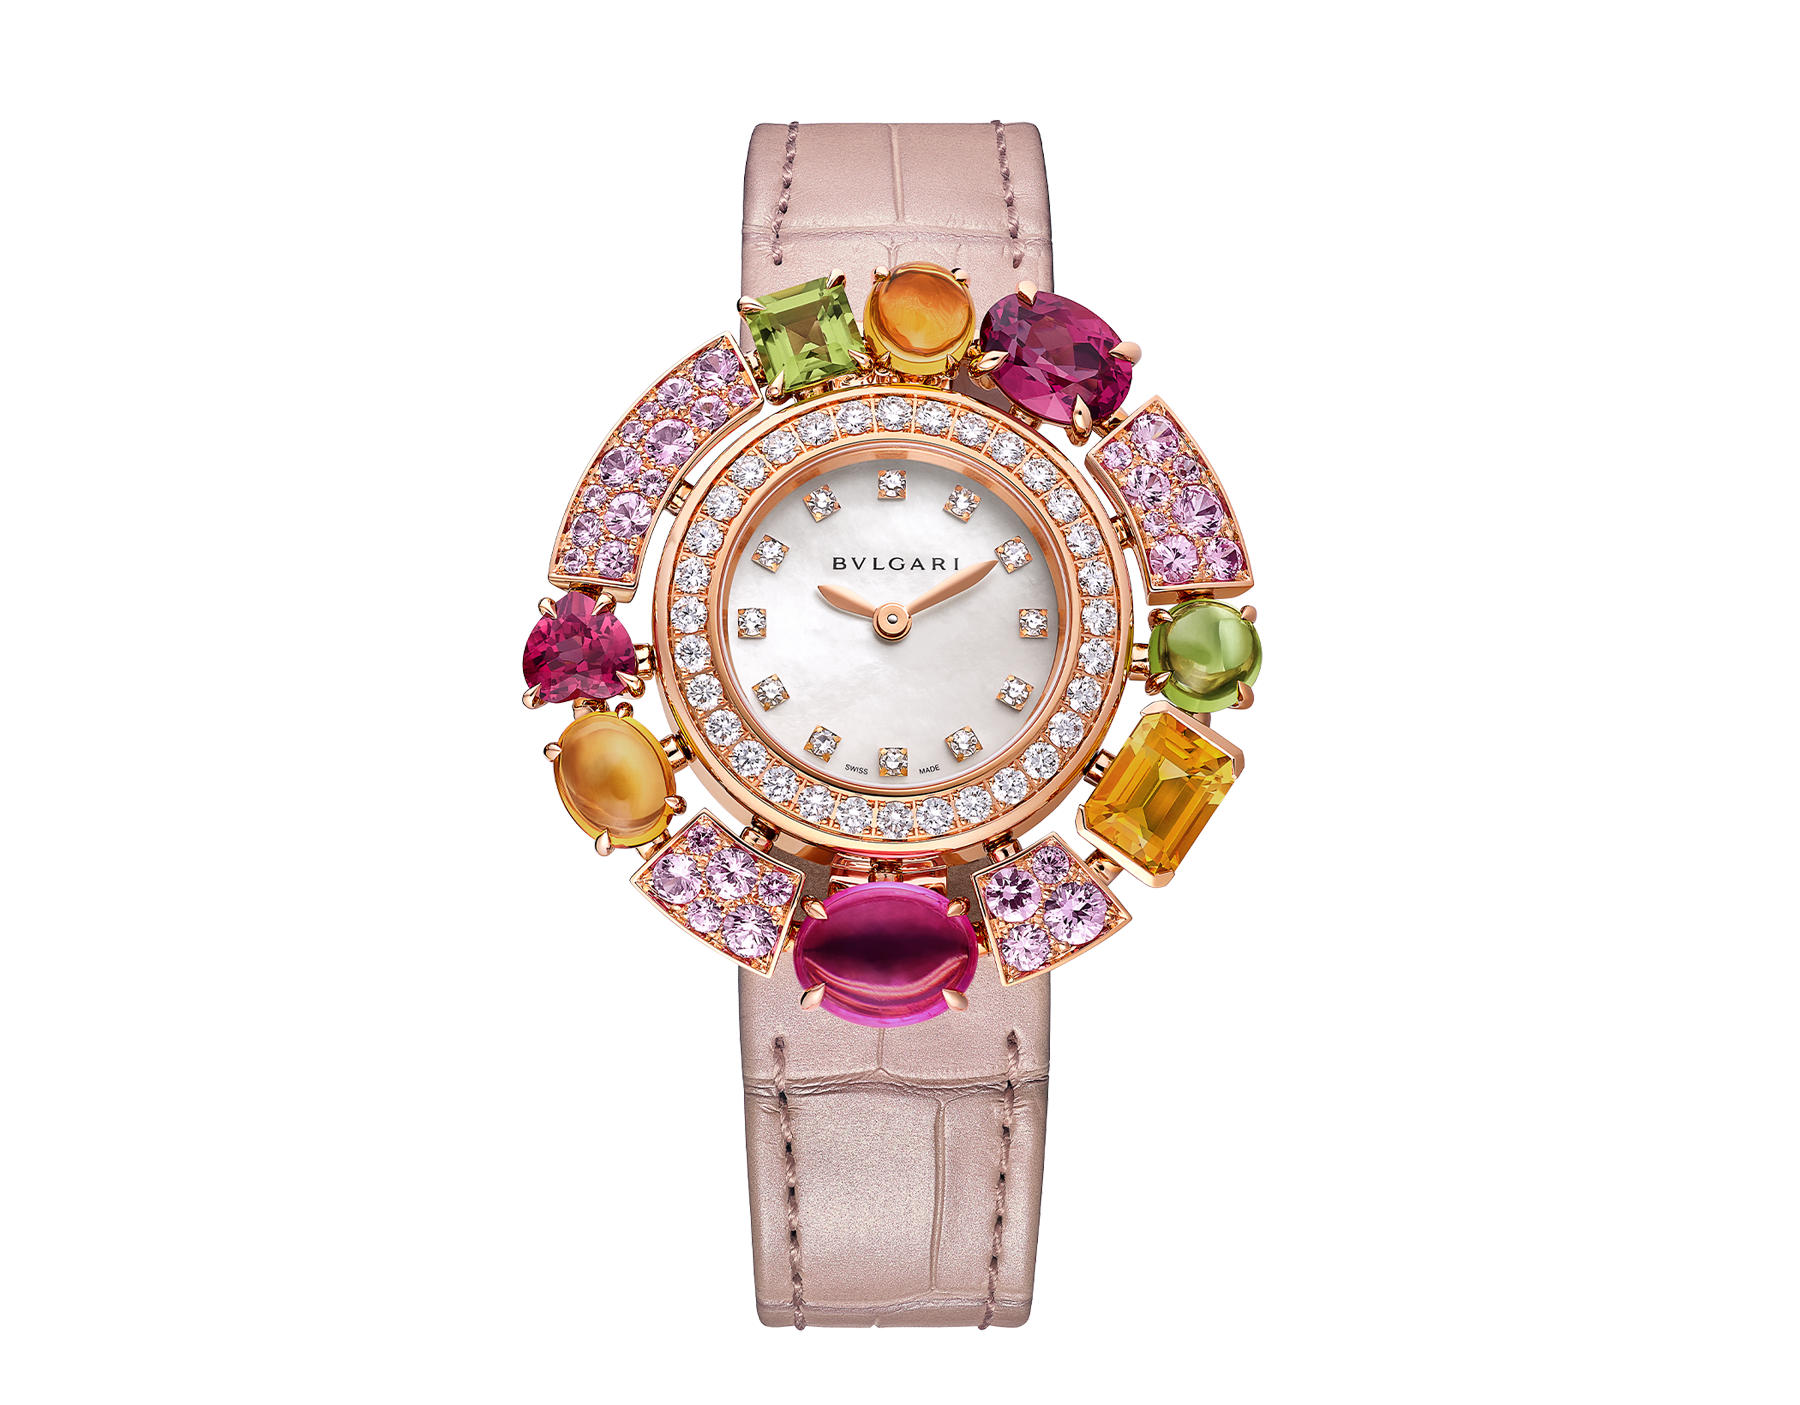 Allegra watch with 18 kt rose gold case set with brilliant-cut diamonds and 32 pink sapphires, 1 pink tourmaline, 3 citrines, 2 dark pink rhodolite and 2 peridots, mother-of-pearl dial, 12 diamond indexes and light pink iridescent alligator bracelet. Water resistant up to 30 meters 103713 image 1